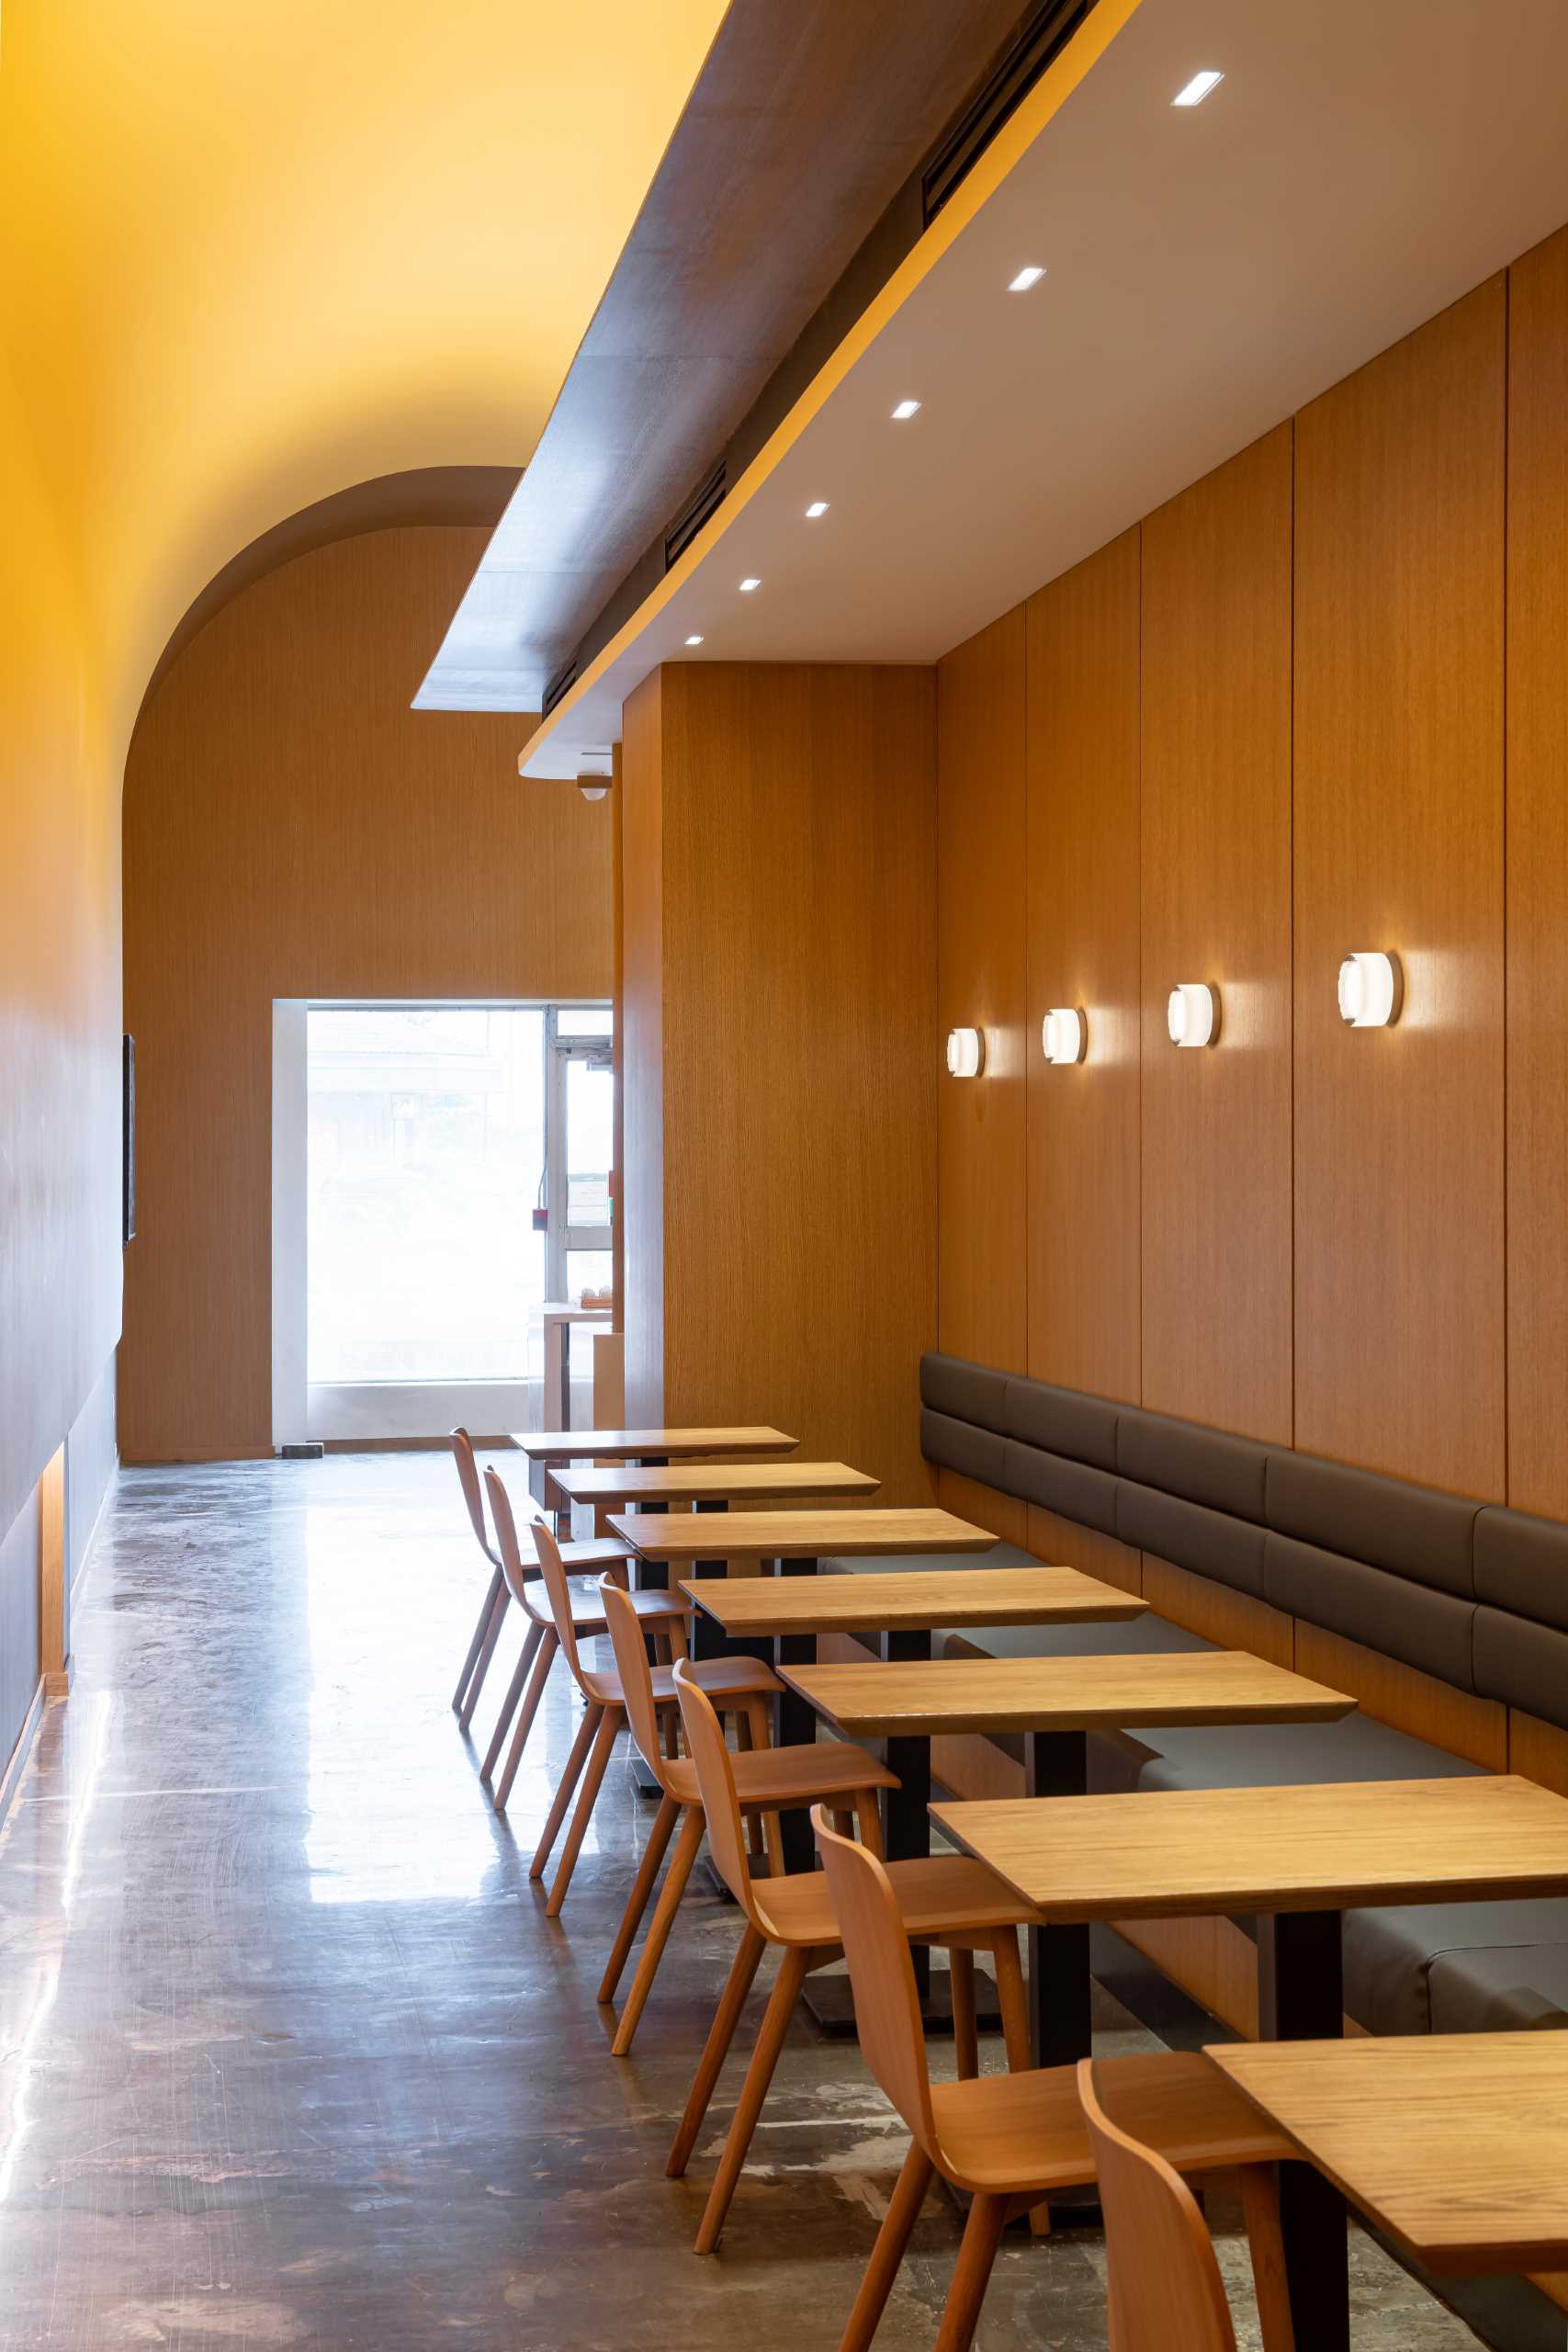 A modern cafe with upholstered banquette seating, wood tables and chairs, and banquette seating.